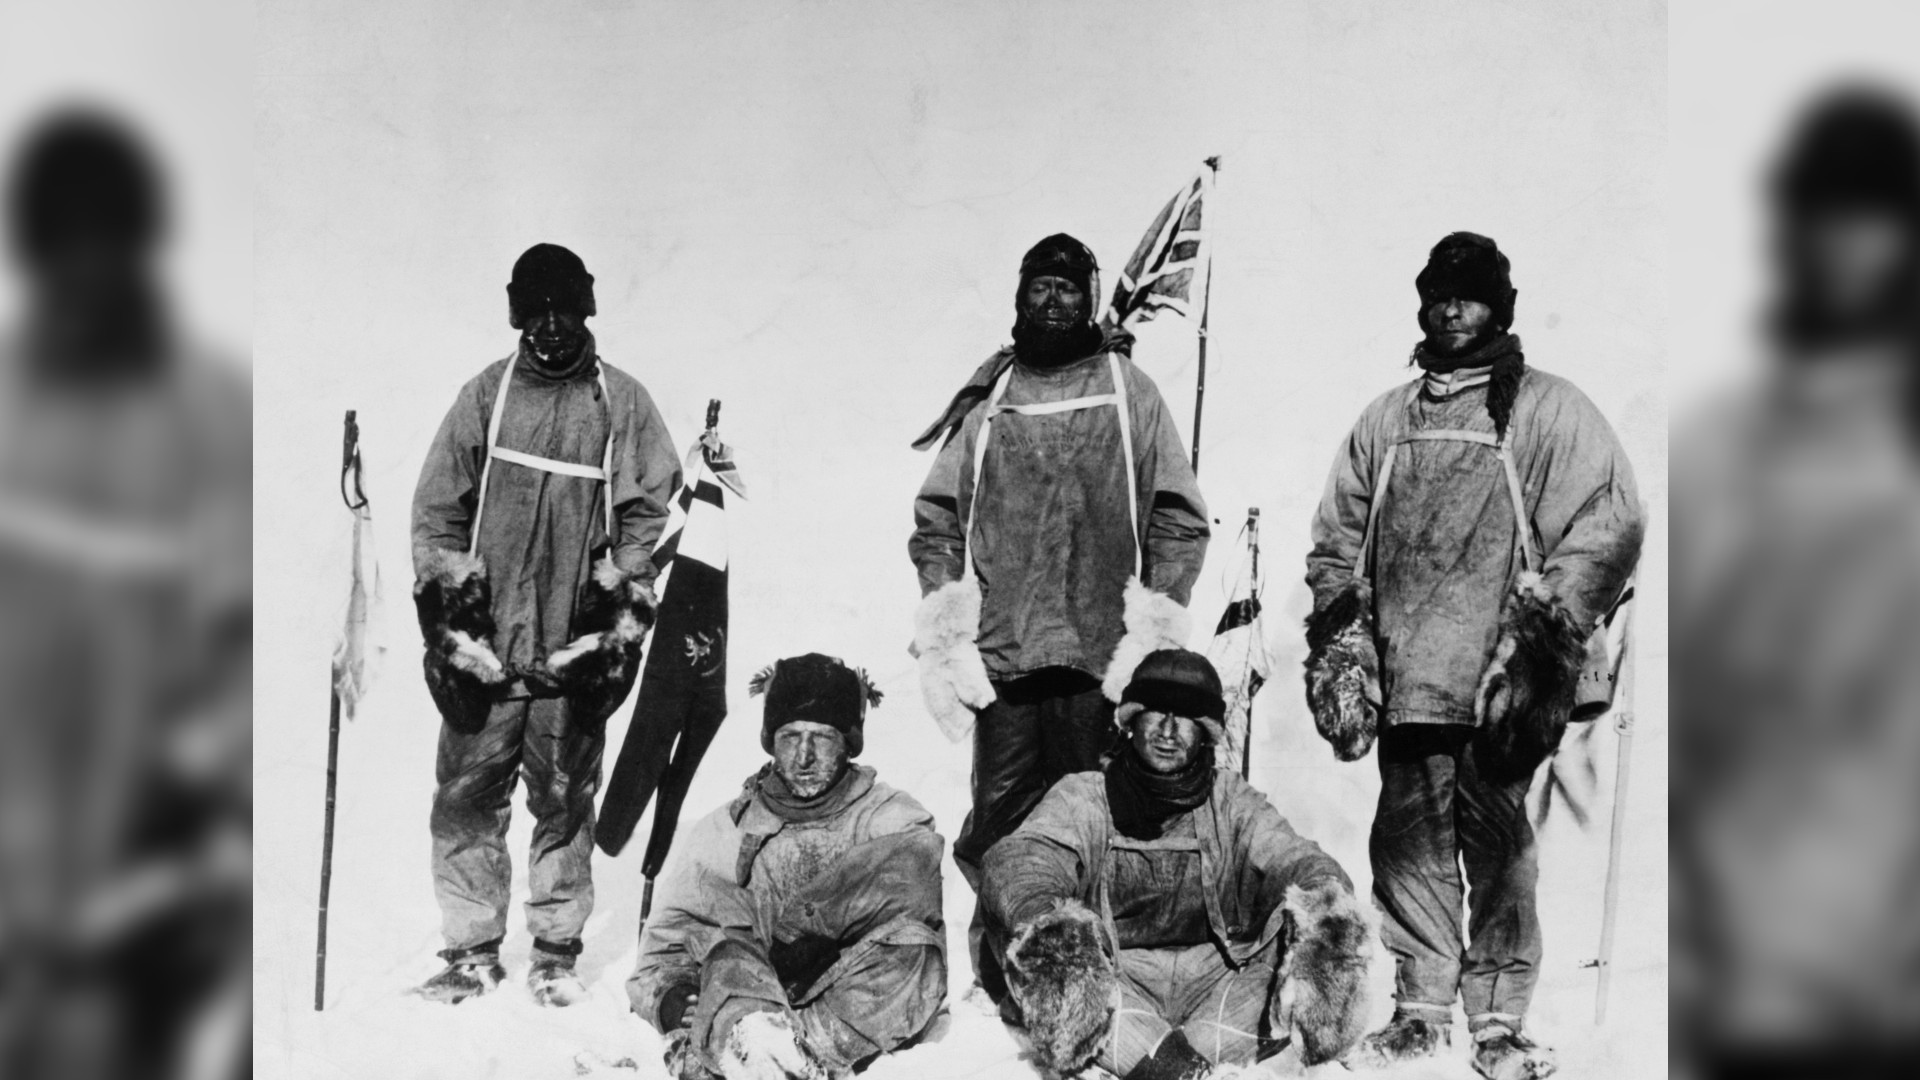 Captain Scott and his crew at the South Pole. Left to right: Laurence Oates, H.R. Bowers, Robert Scott, Edward Wilson and Edgar Evans.